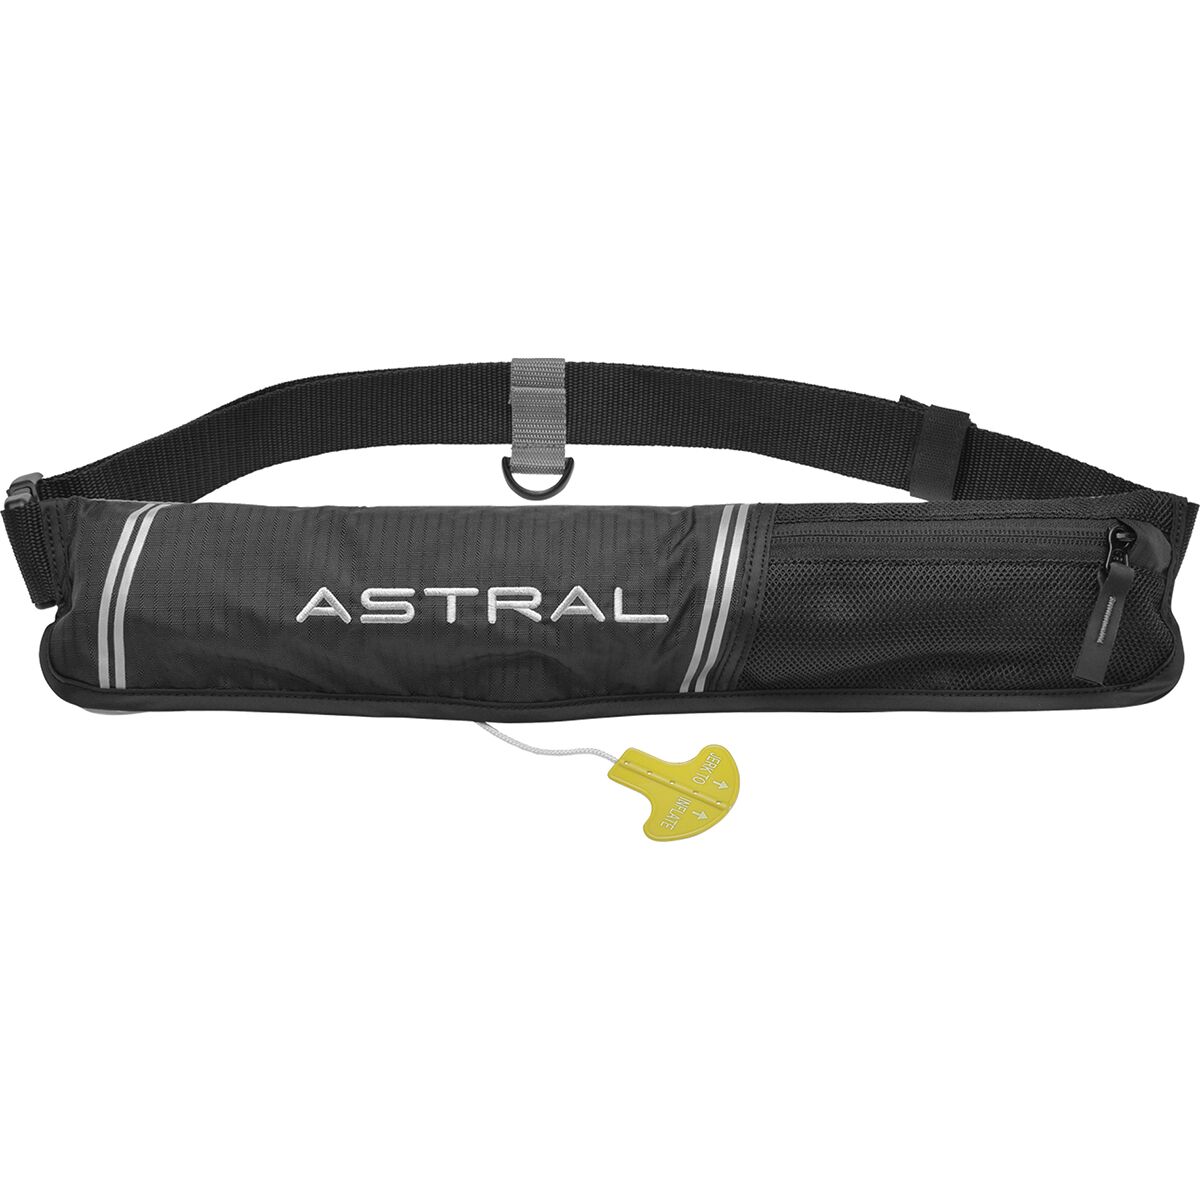 Astral Airbelt 2 Personal Flotation Device